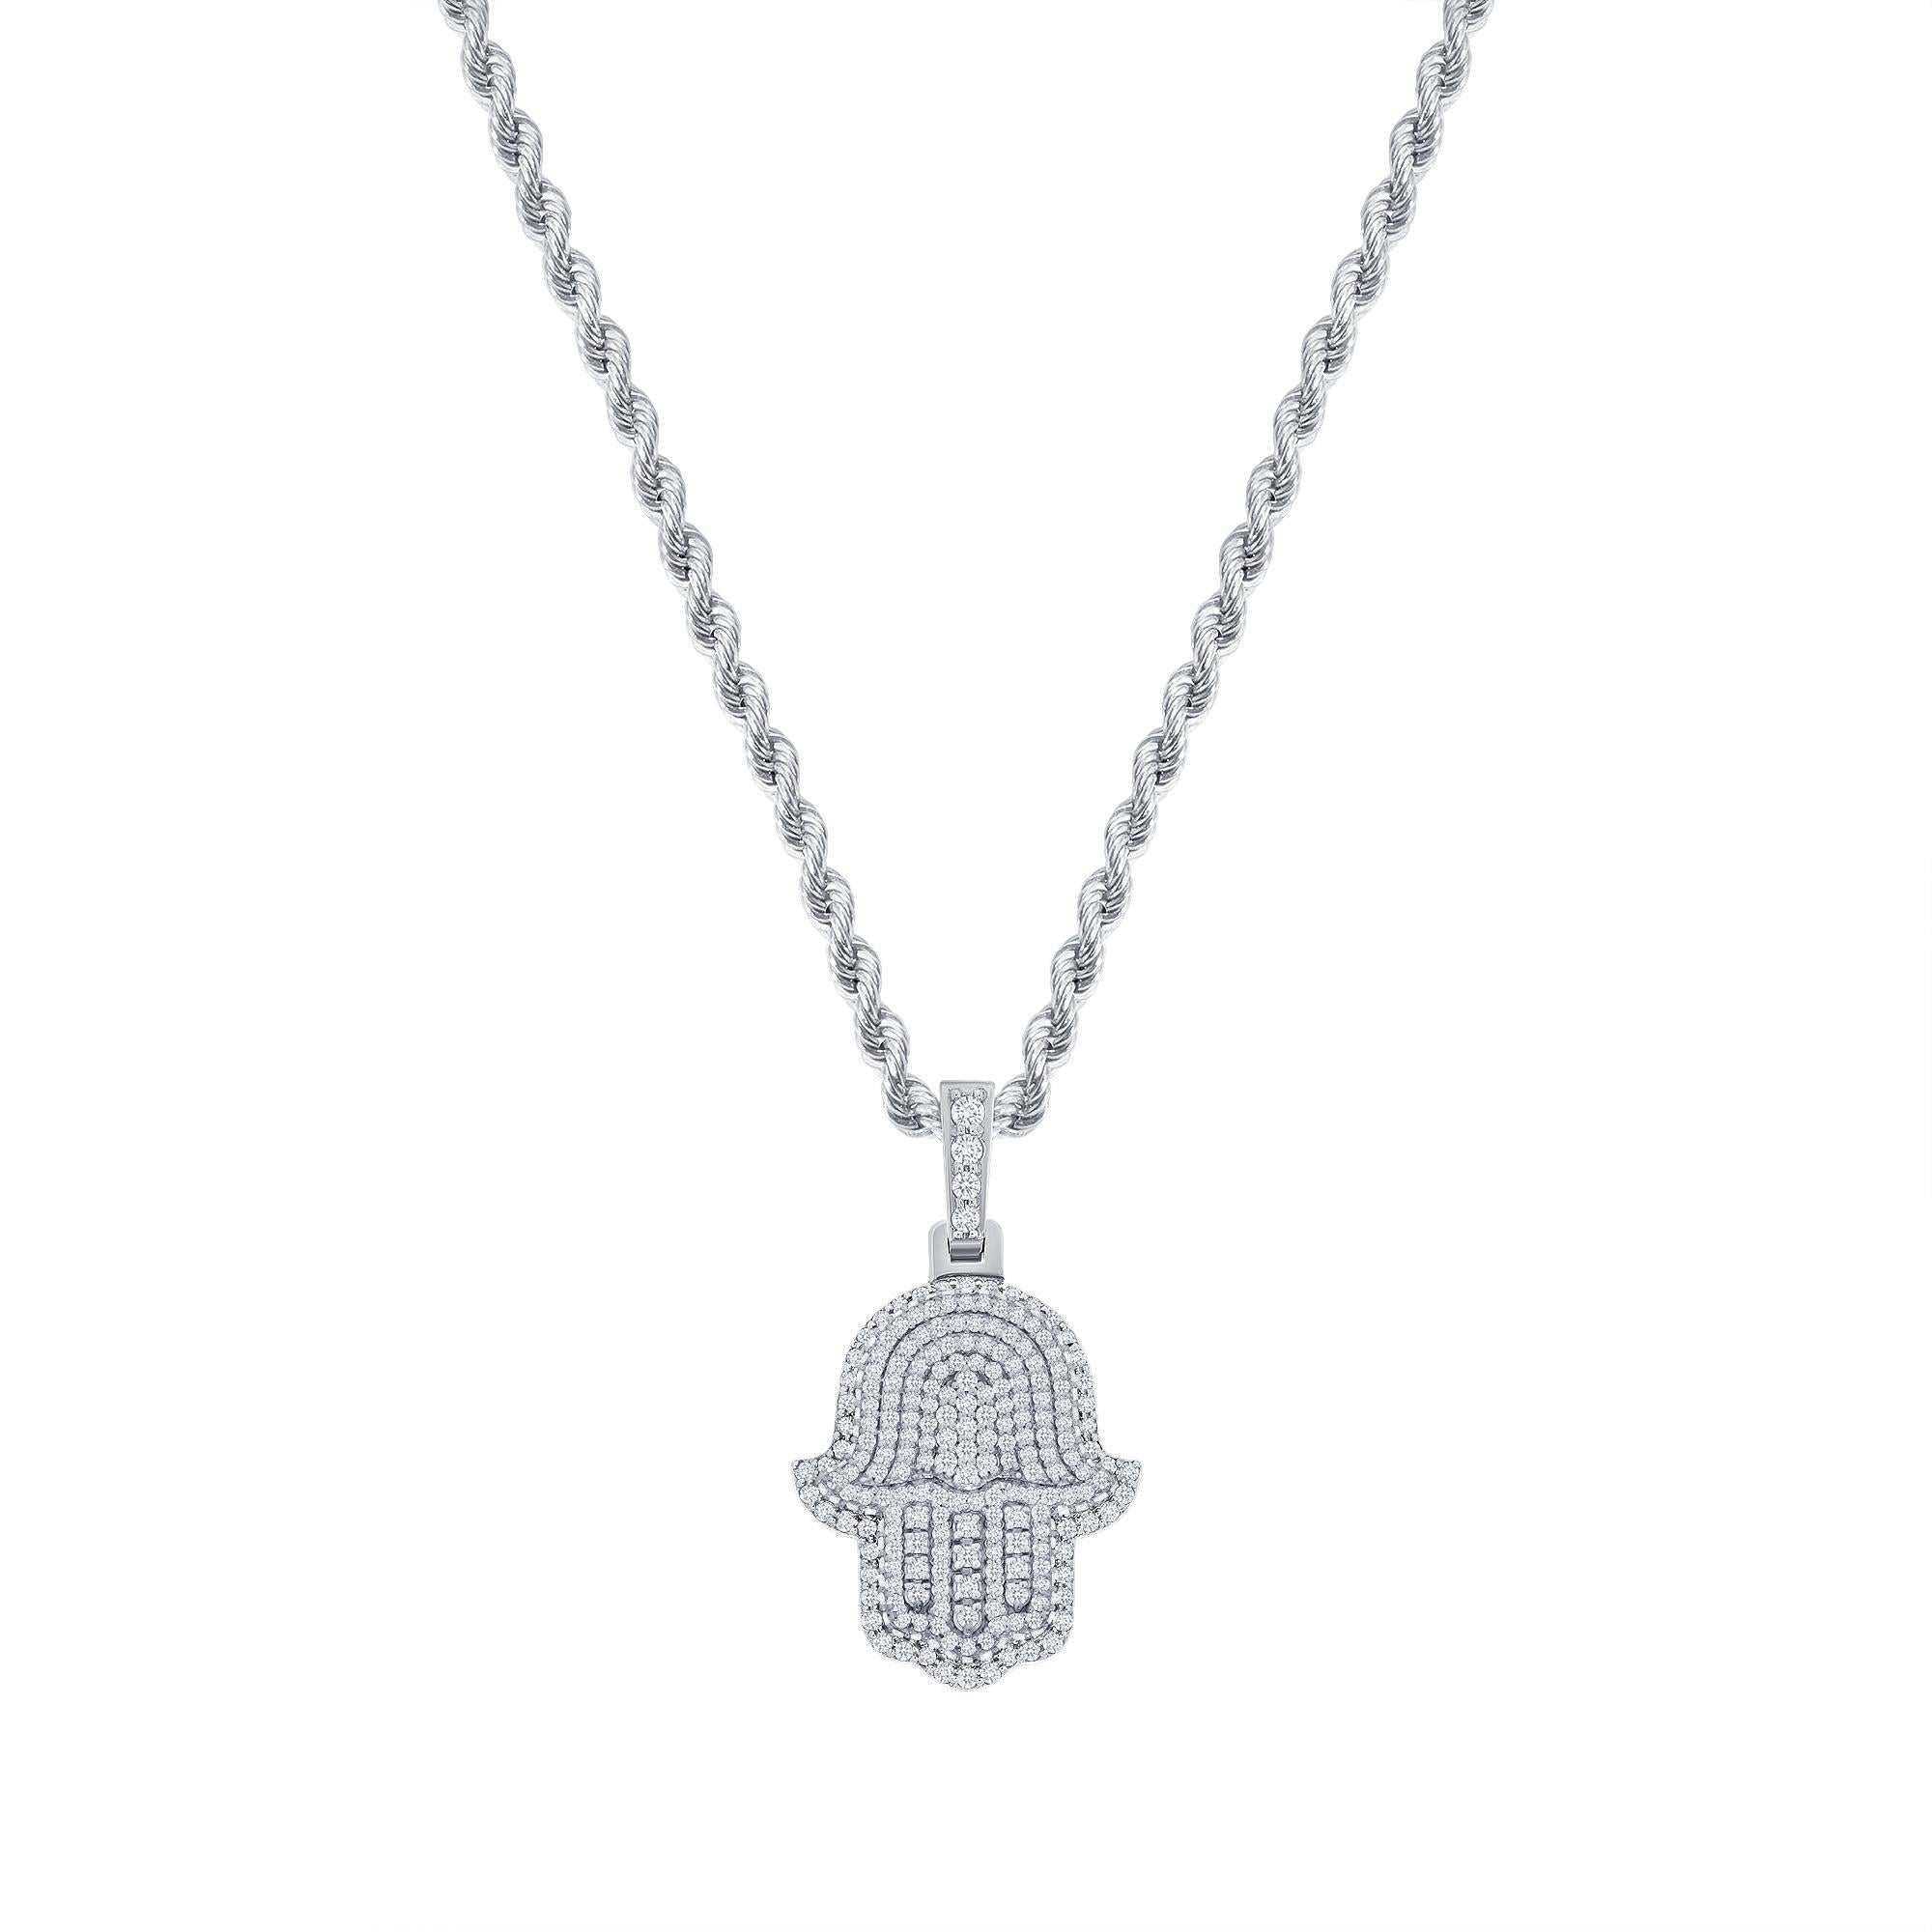 This Hamsa diamond necklace provides both a spiritual and fashionable on trend look. 

Metal: 14k Gold
Diamond Cut: Round
Total Diamond Carats: 2 Carats
Diamond Clarity: VS
Diamond Color: F-G
Necklace Length: 18 Inches
Color: White Gold
